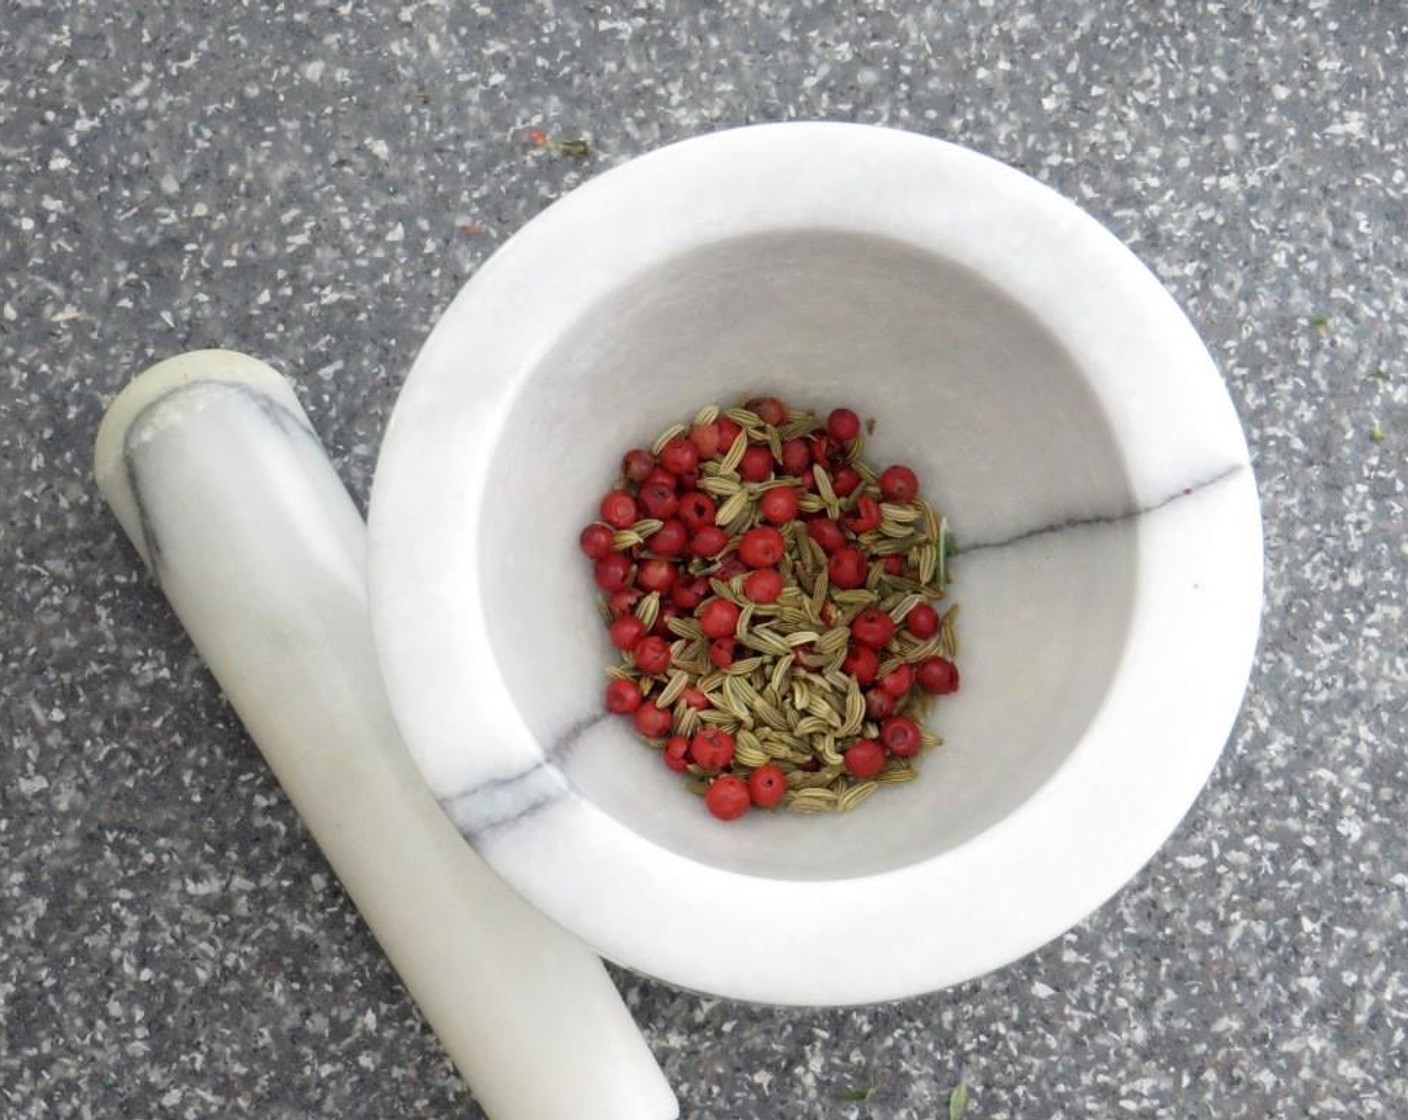 step 1 Lightly crush the Red Peppercorns (1 tsp) and Fennel Seeds (1 tsp) with a mortar with pestle. Chop Fresh Rosemary (1 Tbsp) and Fresh Thyme (1 Tbsp). Mince the Garlic (2 cloves).